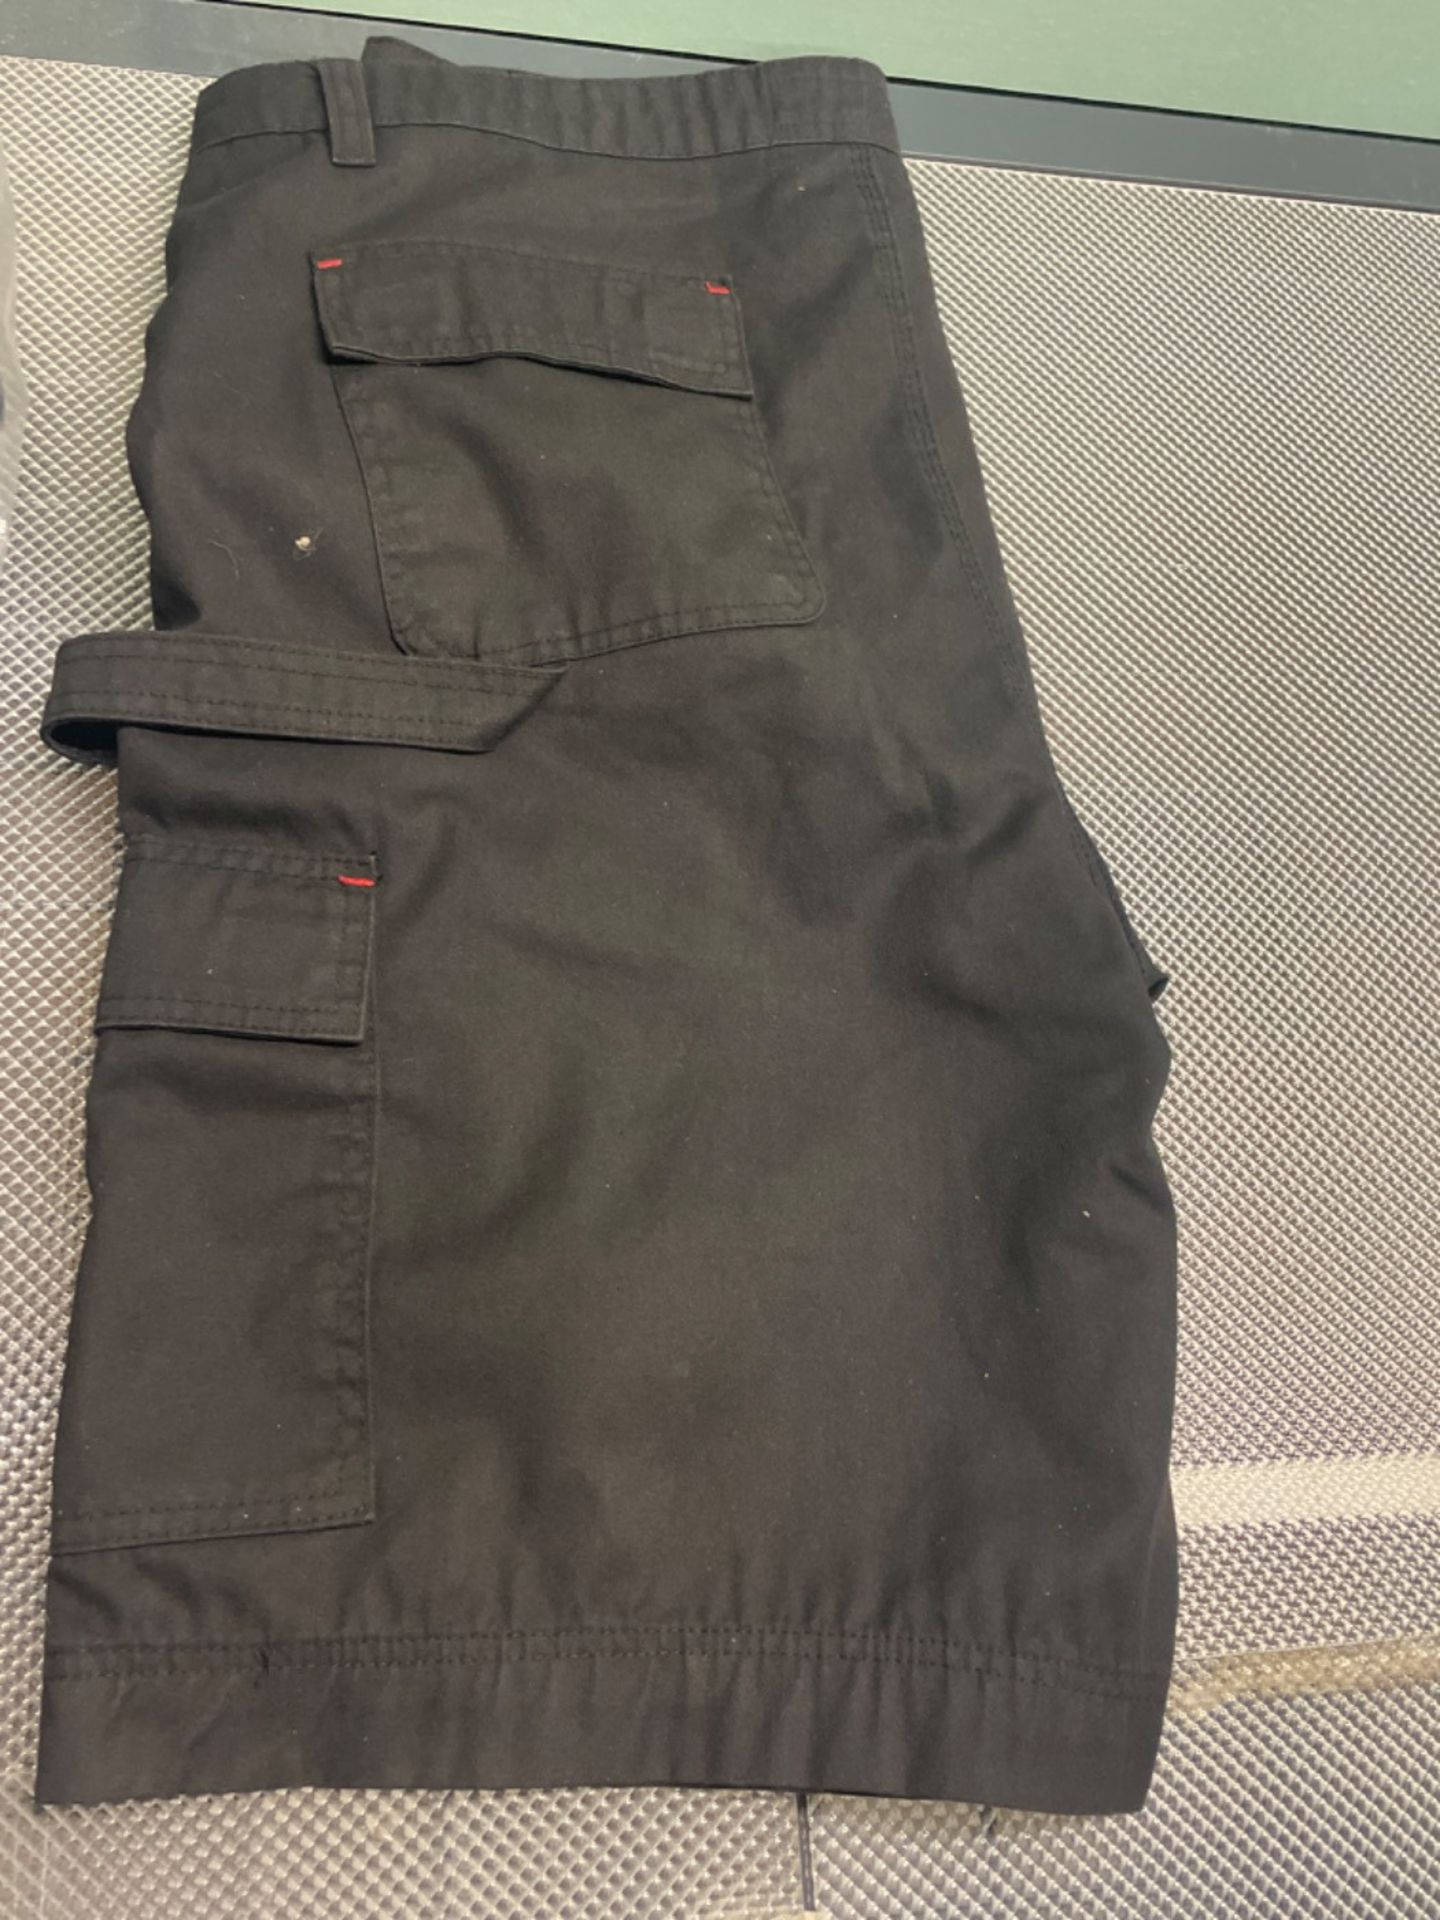 Lee Cooper Classic Multi Pocket Cargo Heavy Duty Easy Care Workwear Shorts, Black, 40W - Image 3 of 3